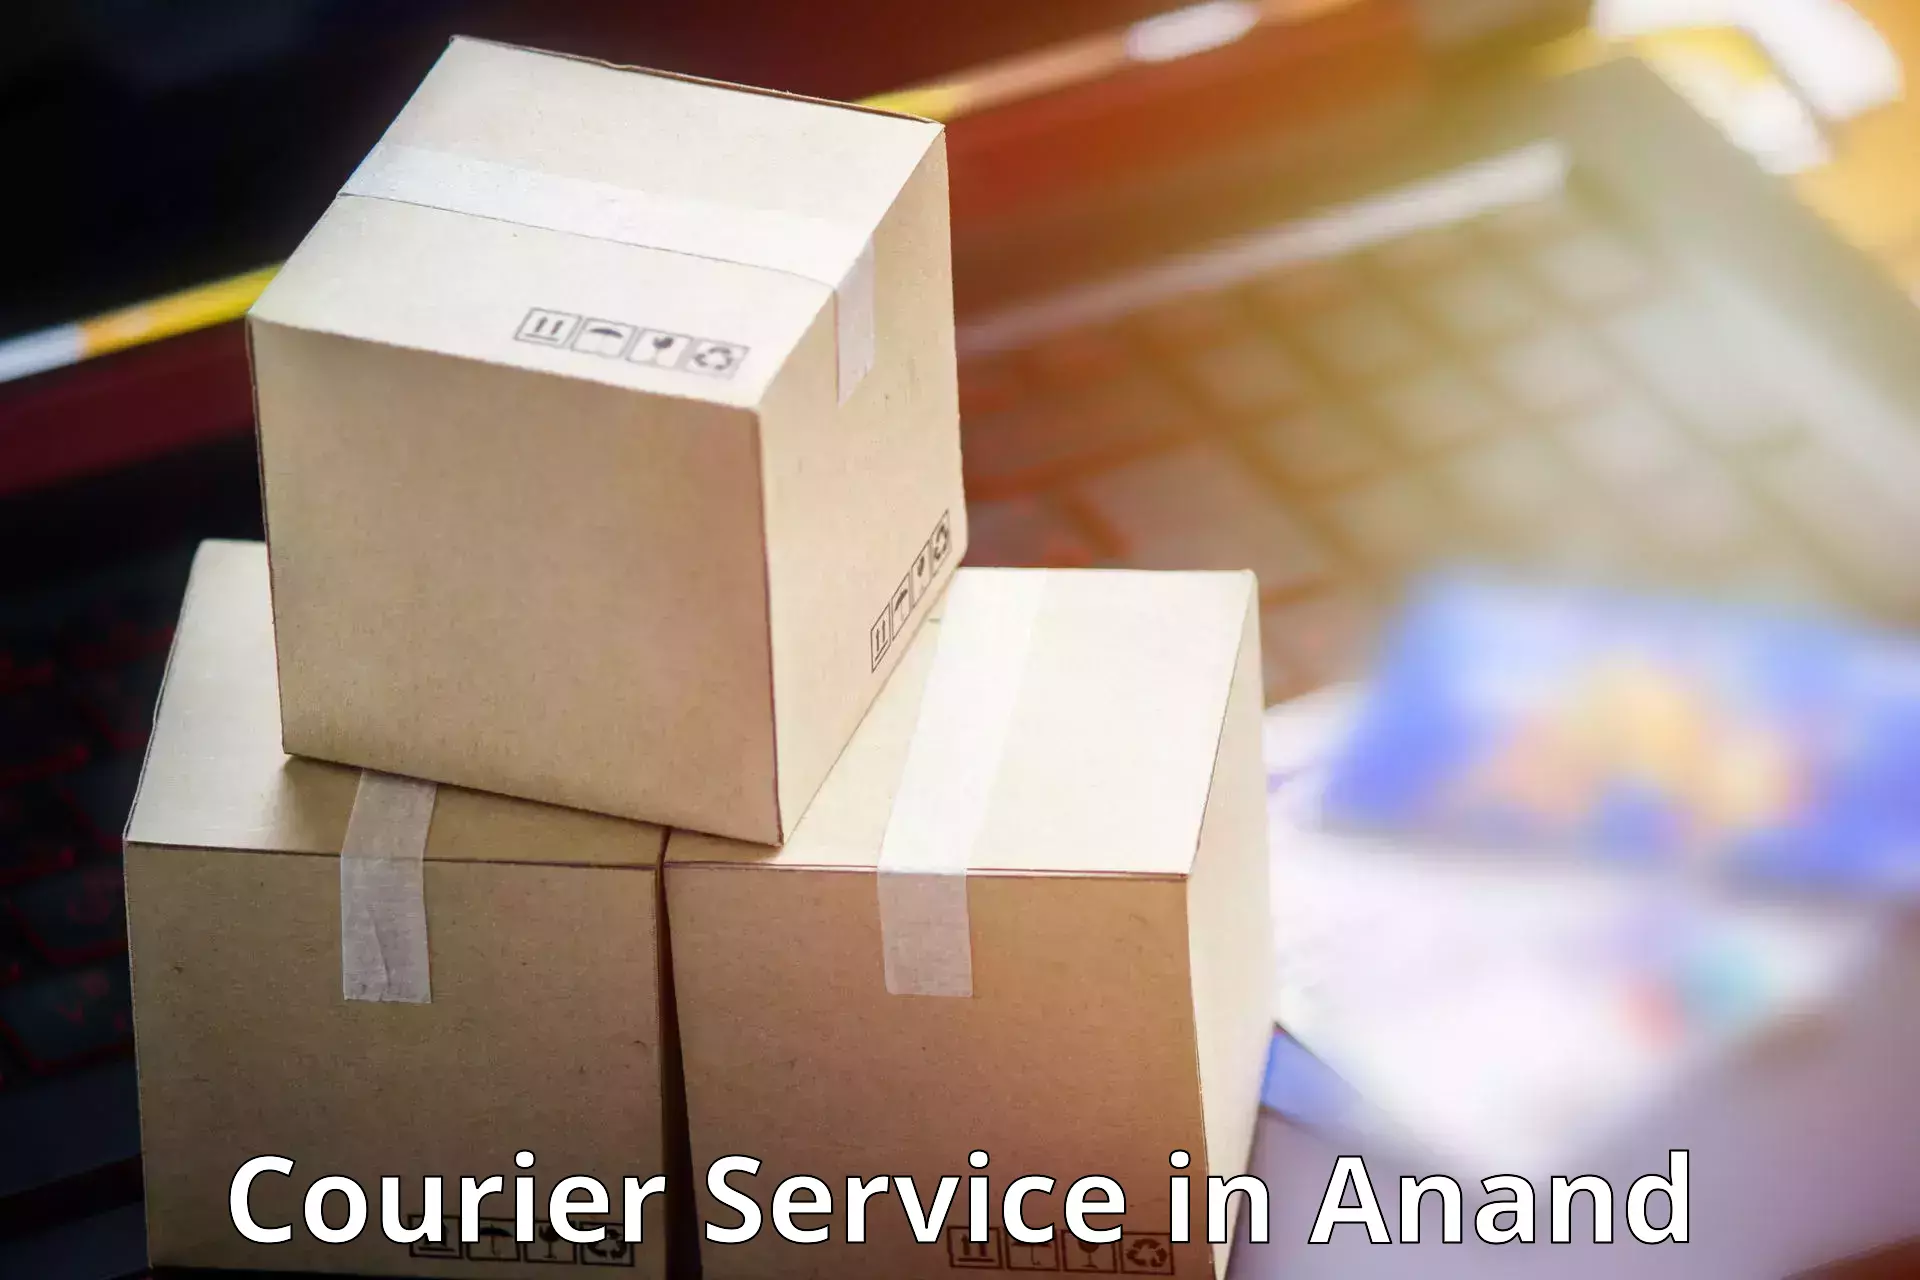 Logistics solutions in Anand